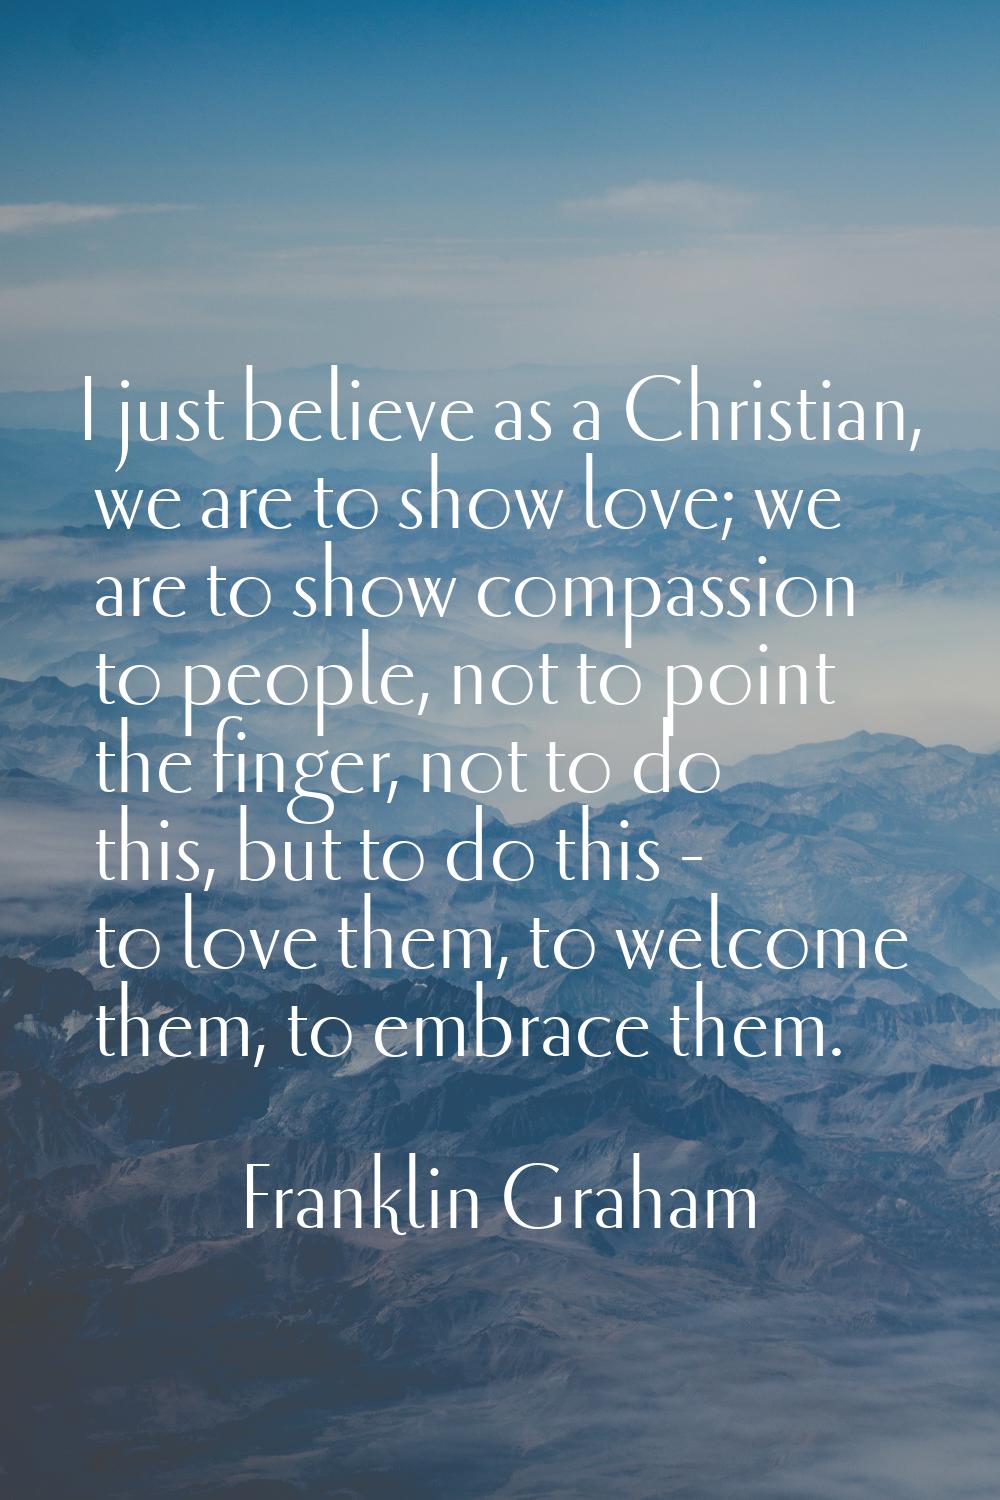 I just believe as a Christian, we are to show love; we are to show compassion to people, not to poi